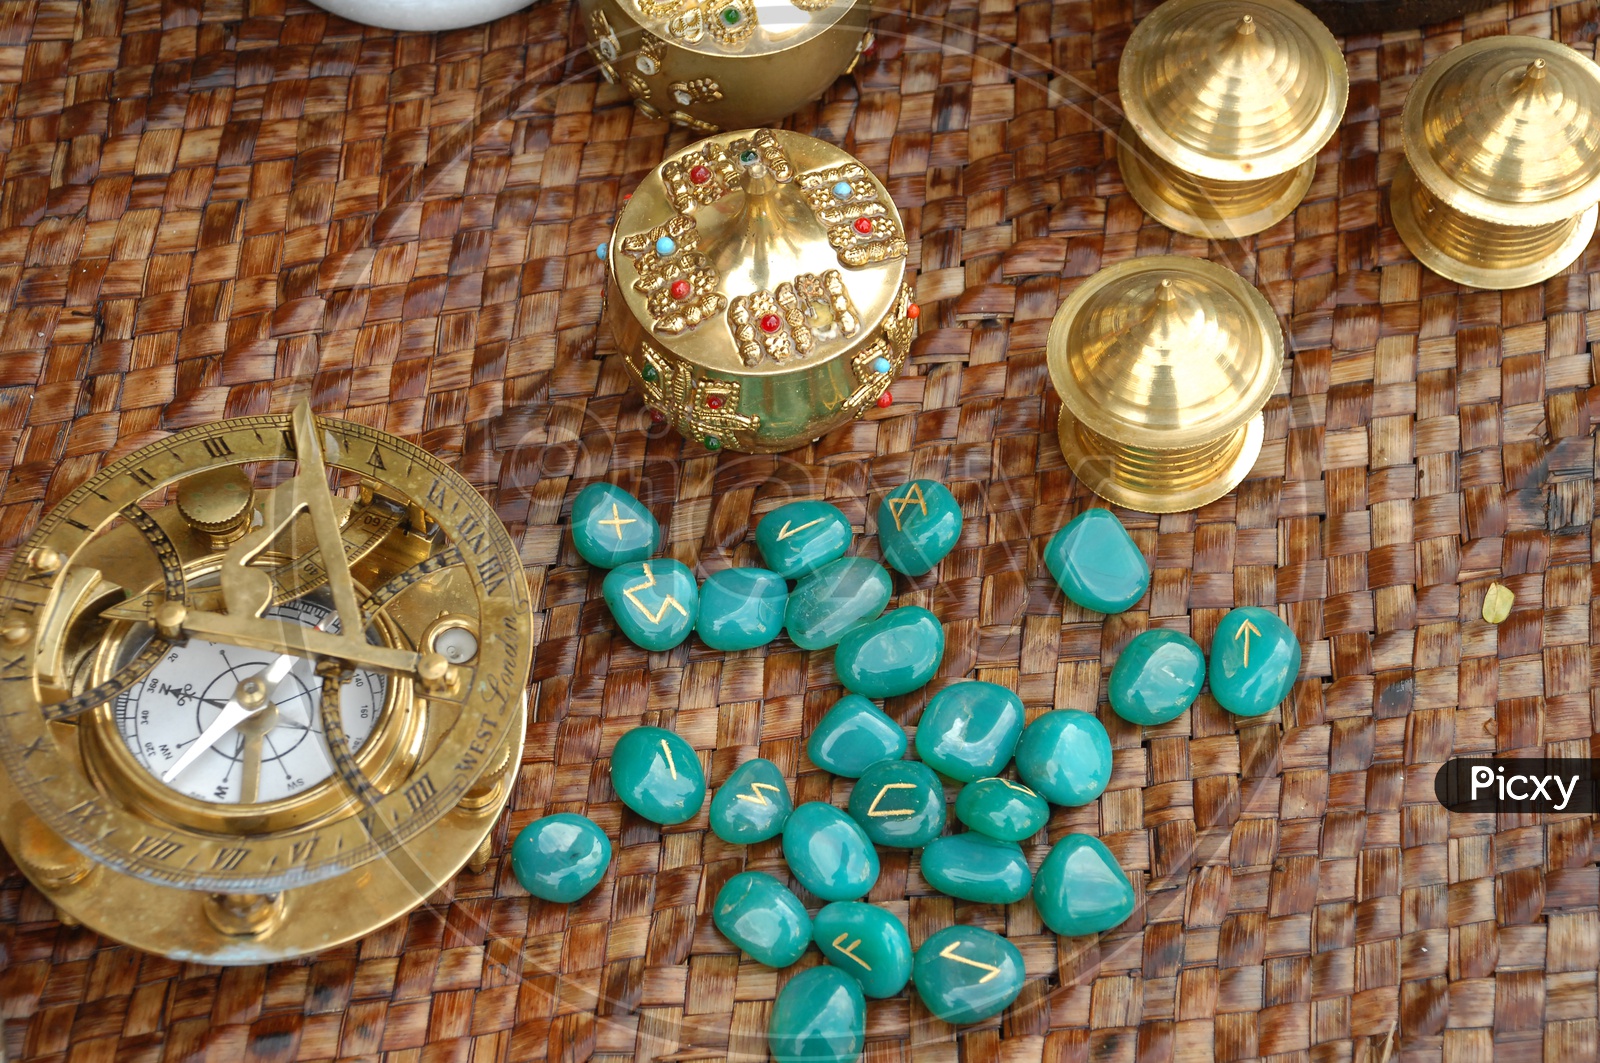 Brass Vessels and Ceramic pellets With Zodiac Signs